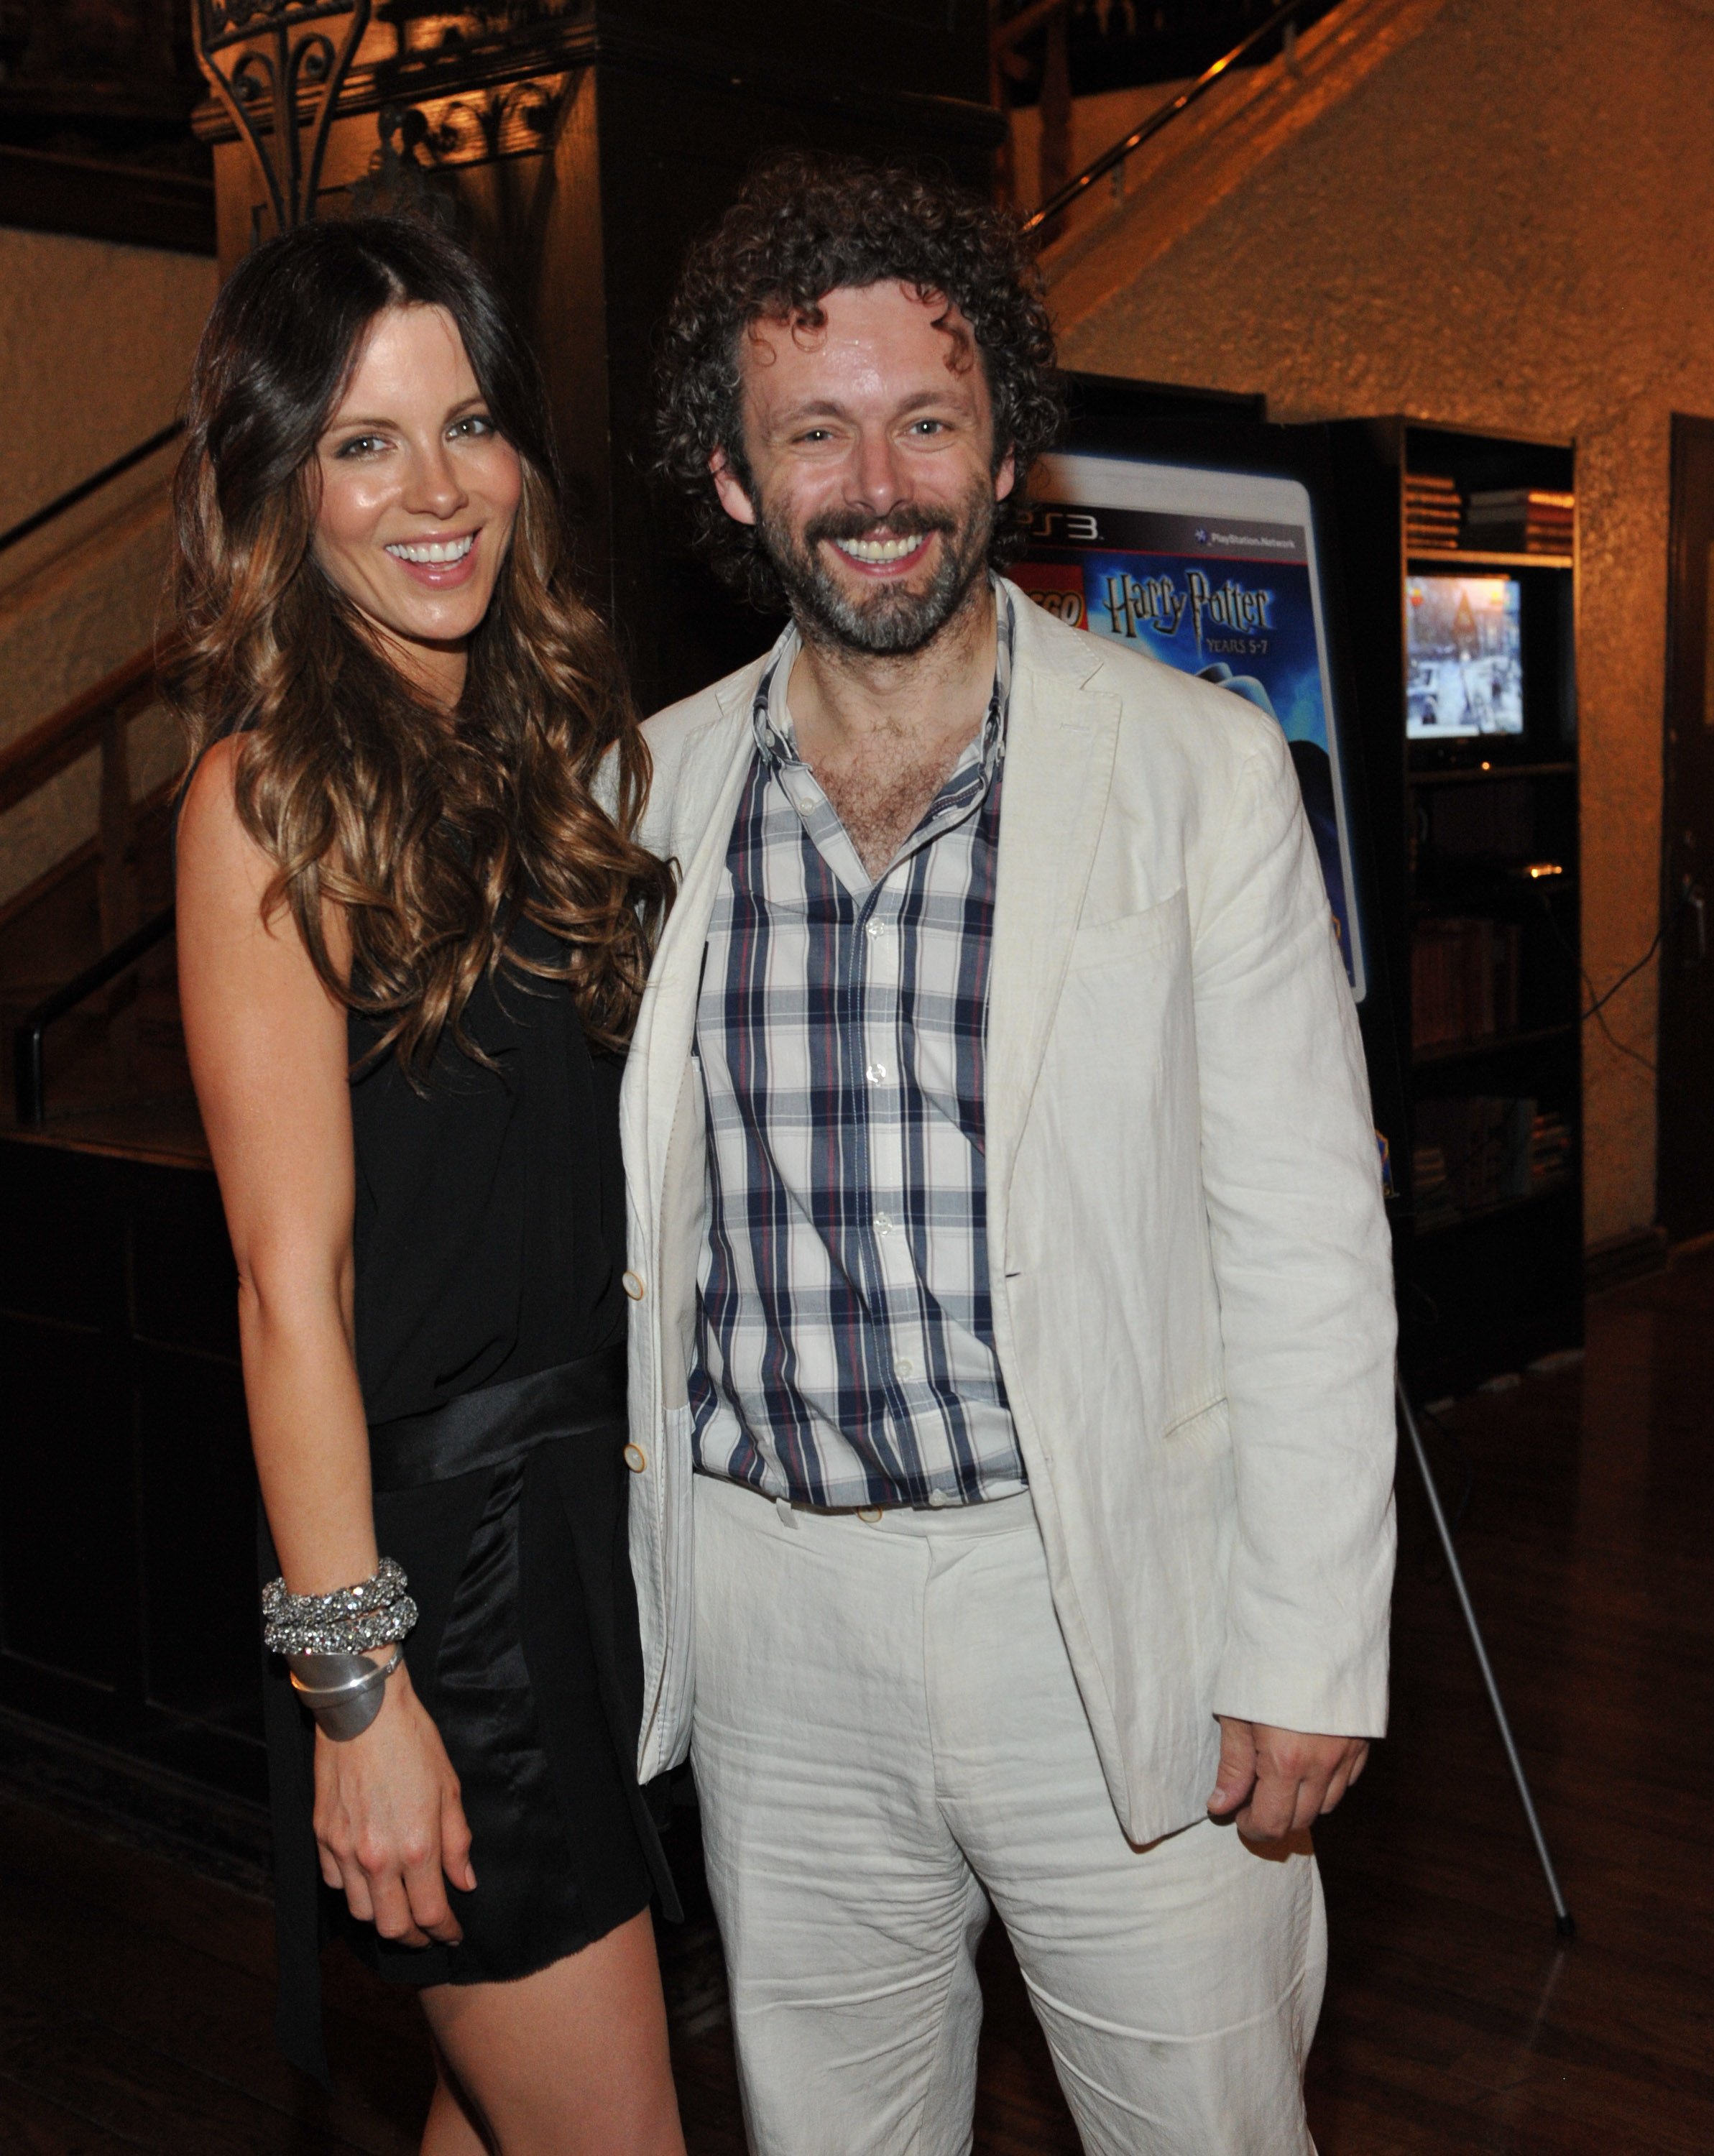 Kate Beckinsale and Michael Sheen on July 12, 2011 in Toronto, Canada | Photo: Getty Images